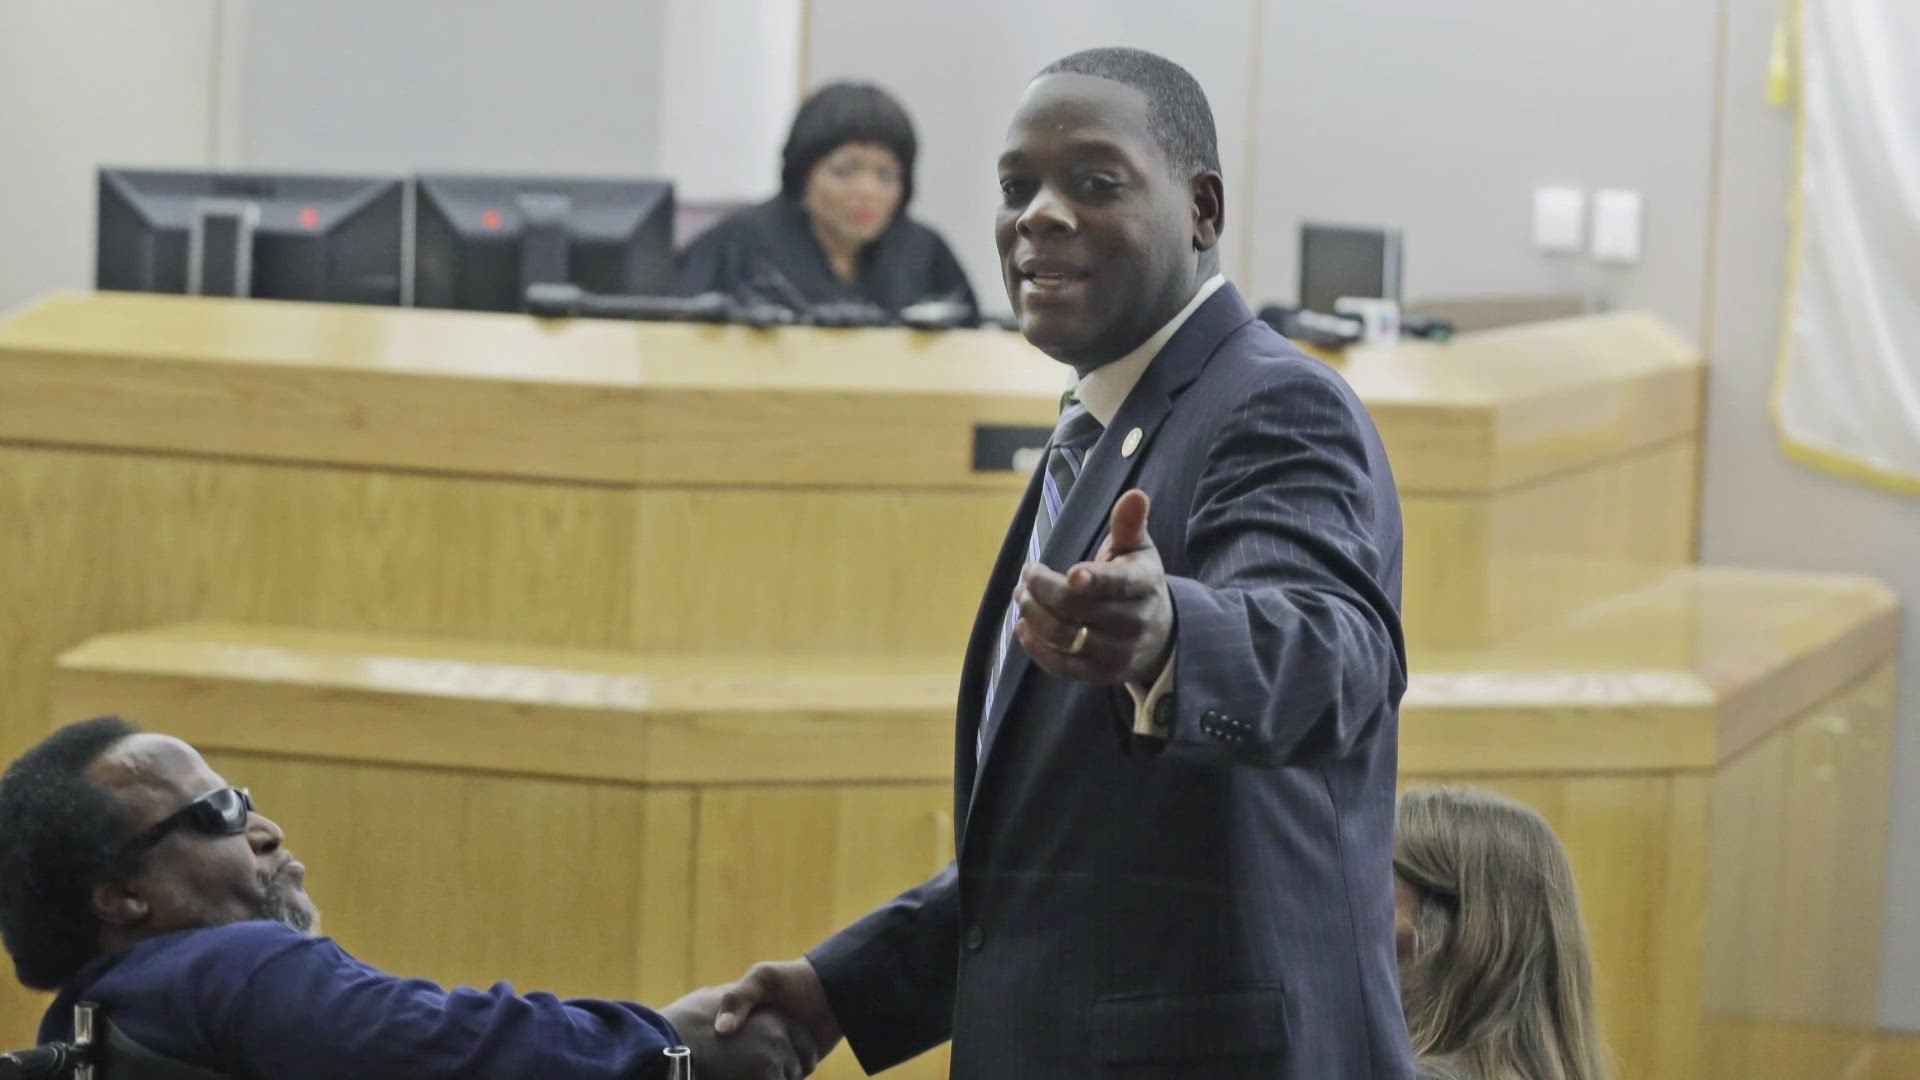 Watkins was the first Black District Attorney in Texas, and helped restore the faith in the justice system by freeing wrongfully imprisoned inmates. He was 56.